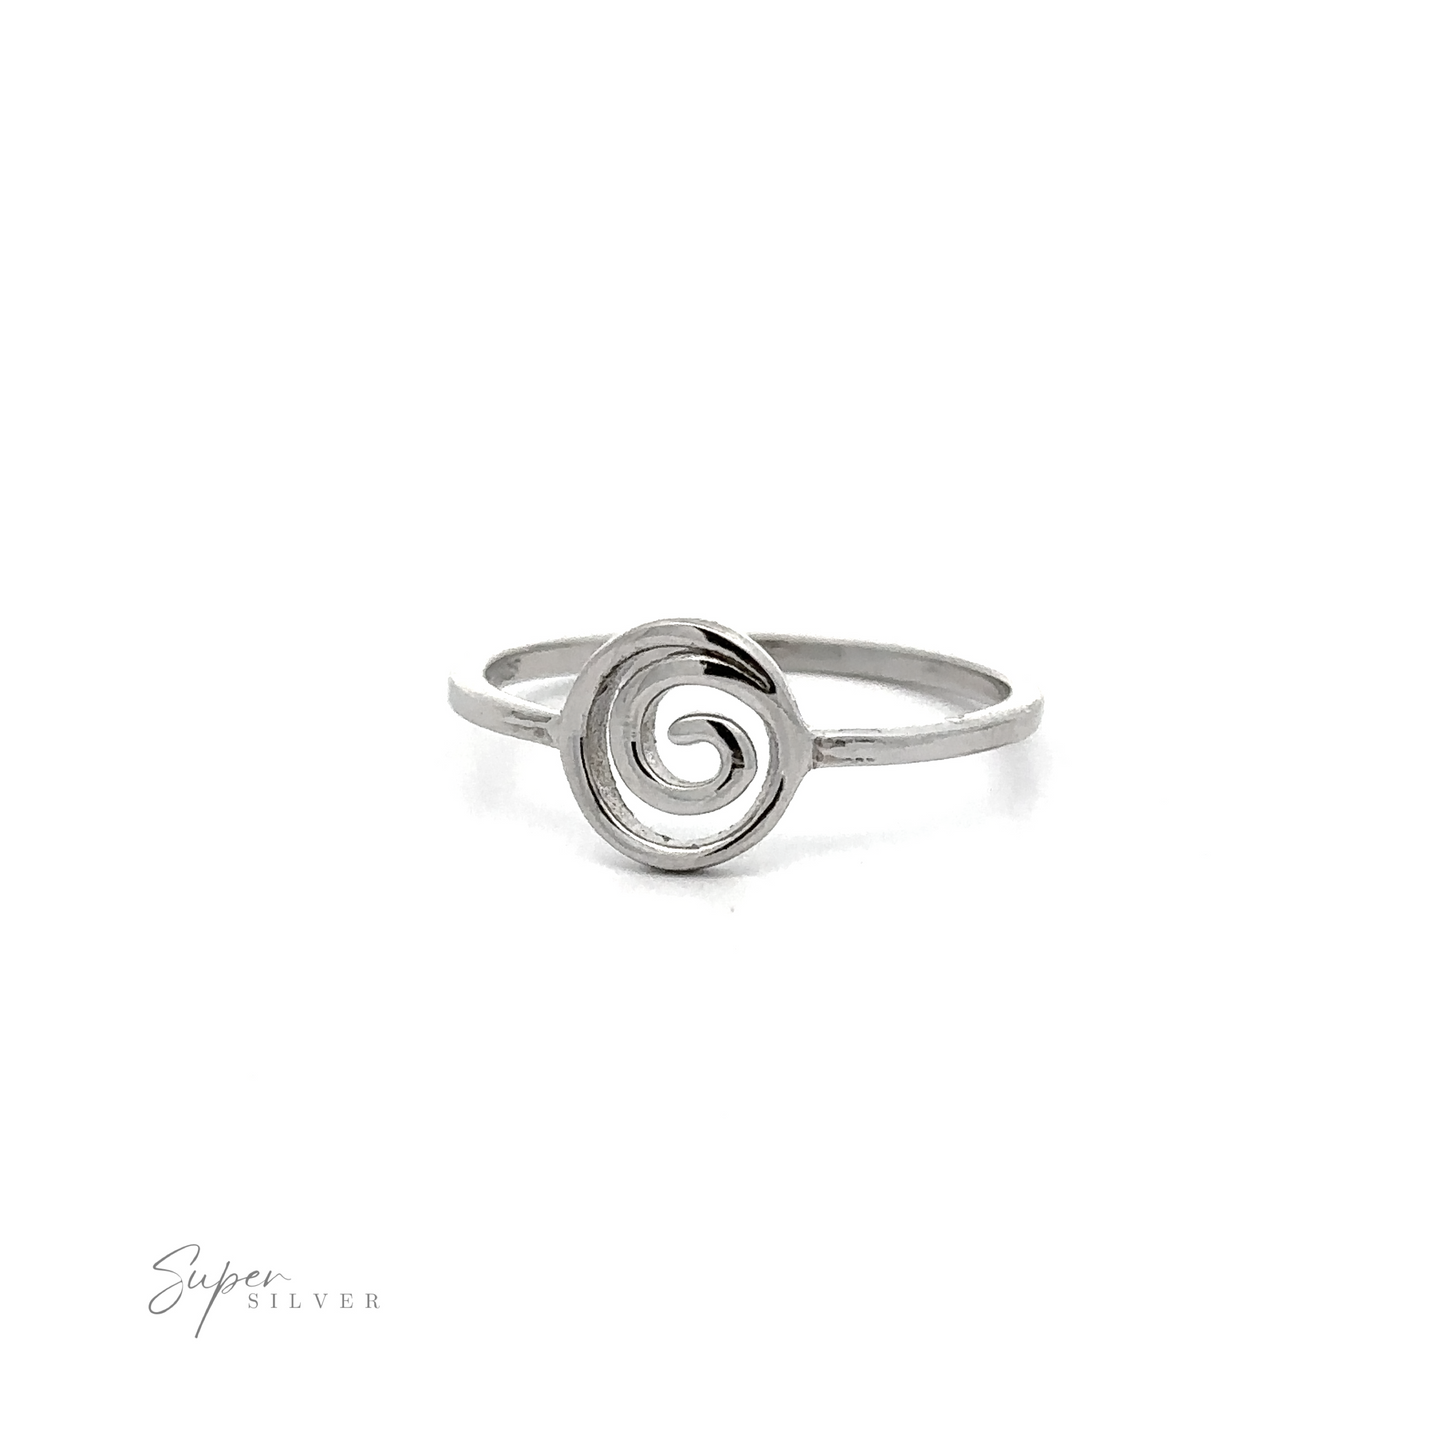 A Spiral Ring with a spiral design, featuring a high polish for added elegance.